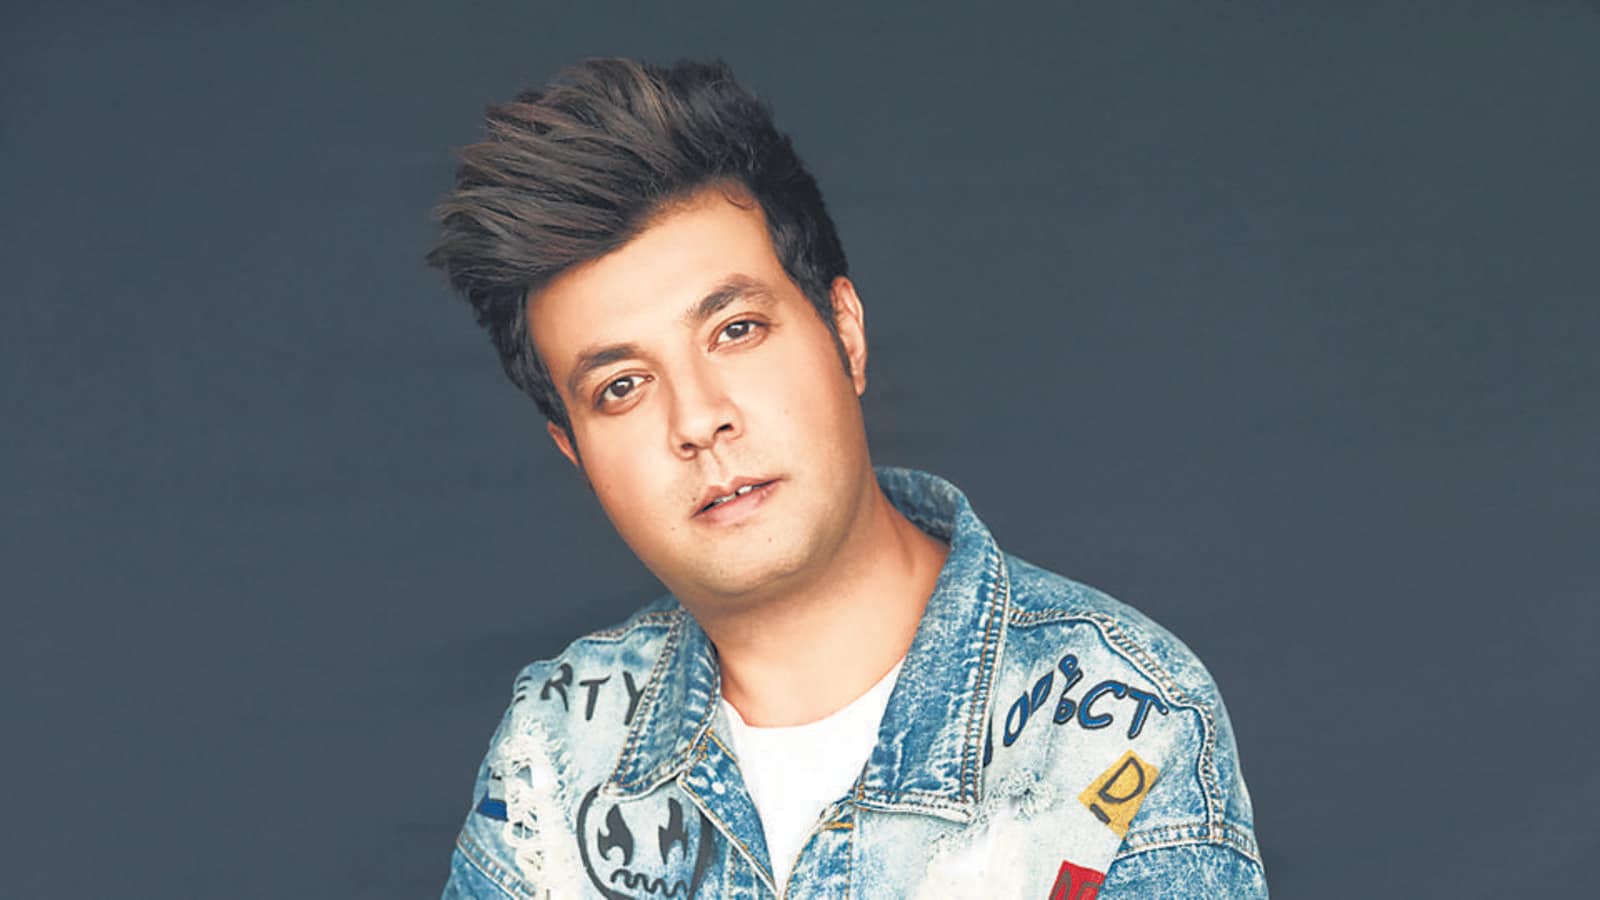 Varun Sharma on National Award for Chhichhore: The celebration was incomplete with a bit of hollowness